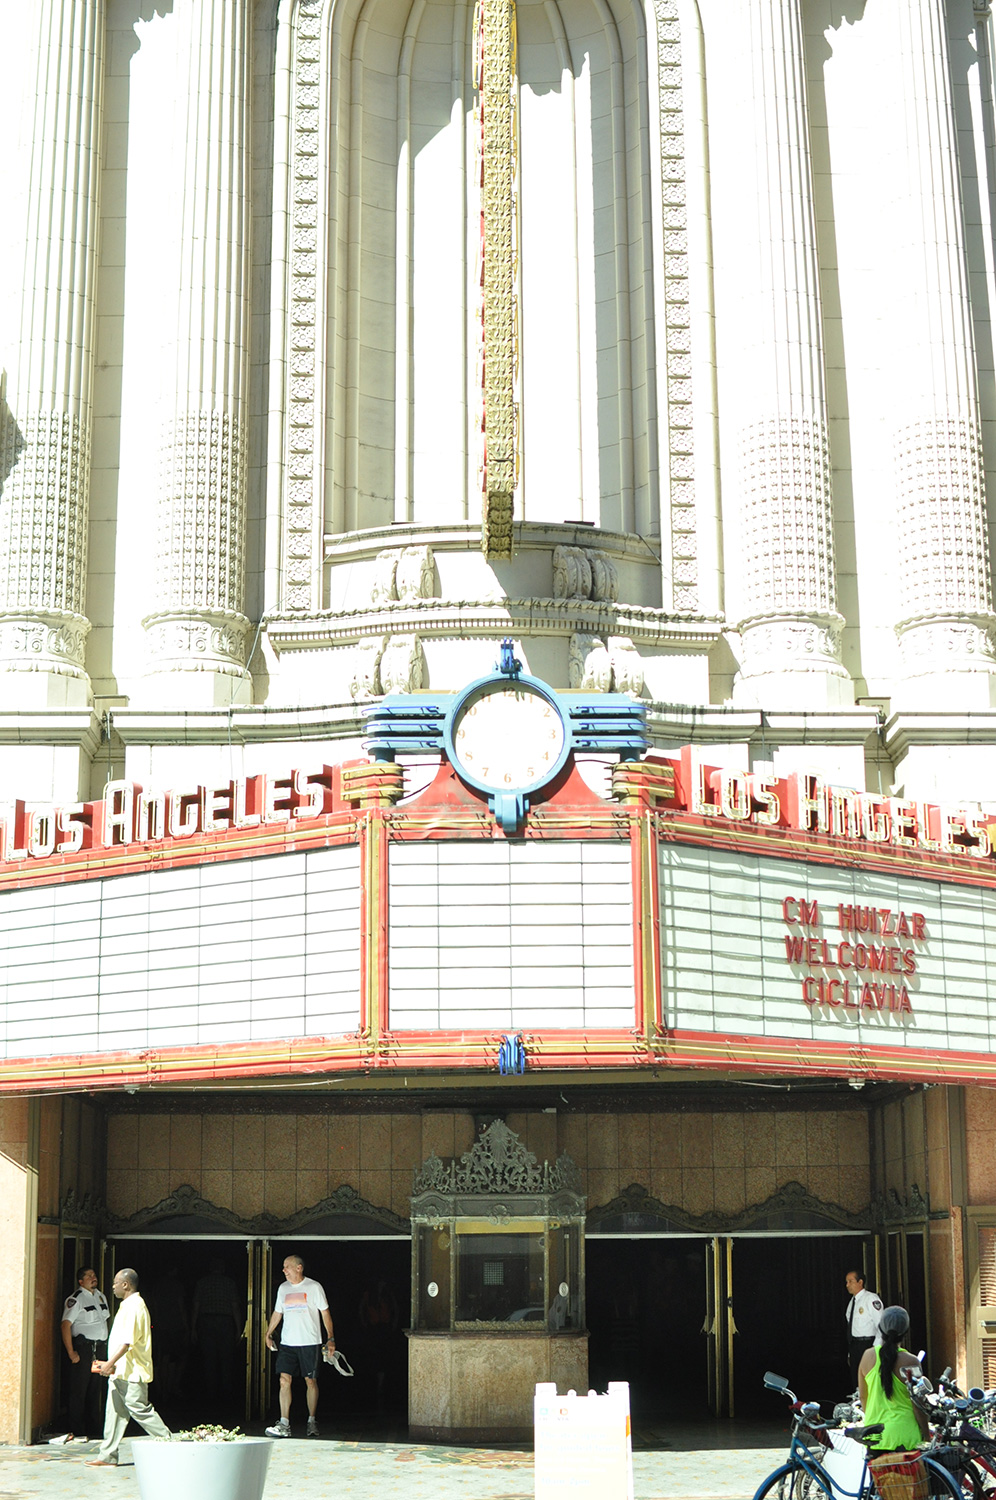 Los Angeles Theater, L.A.